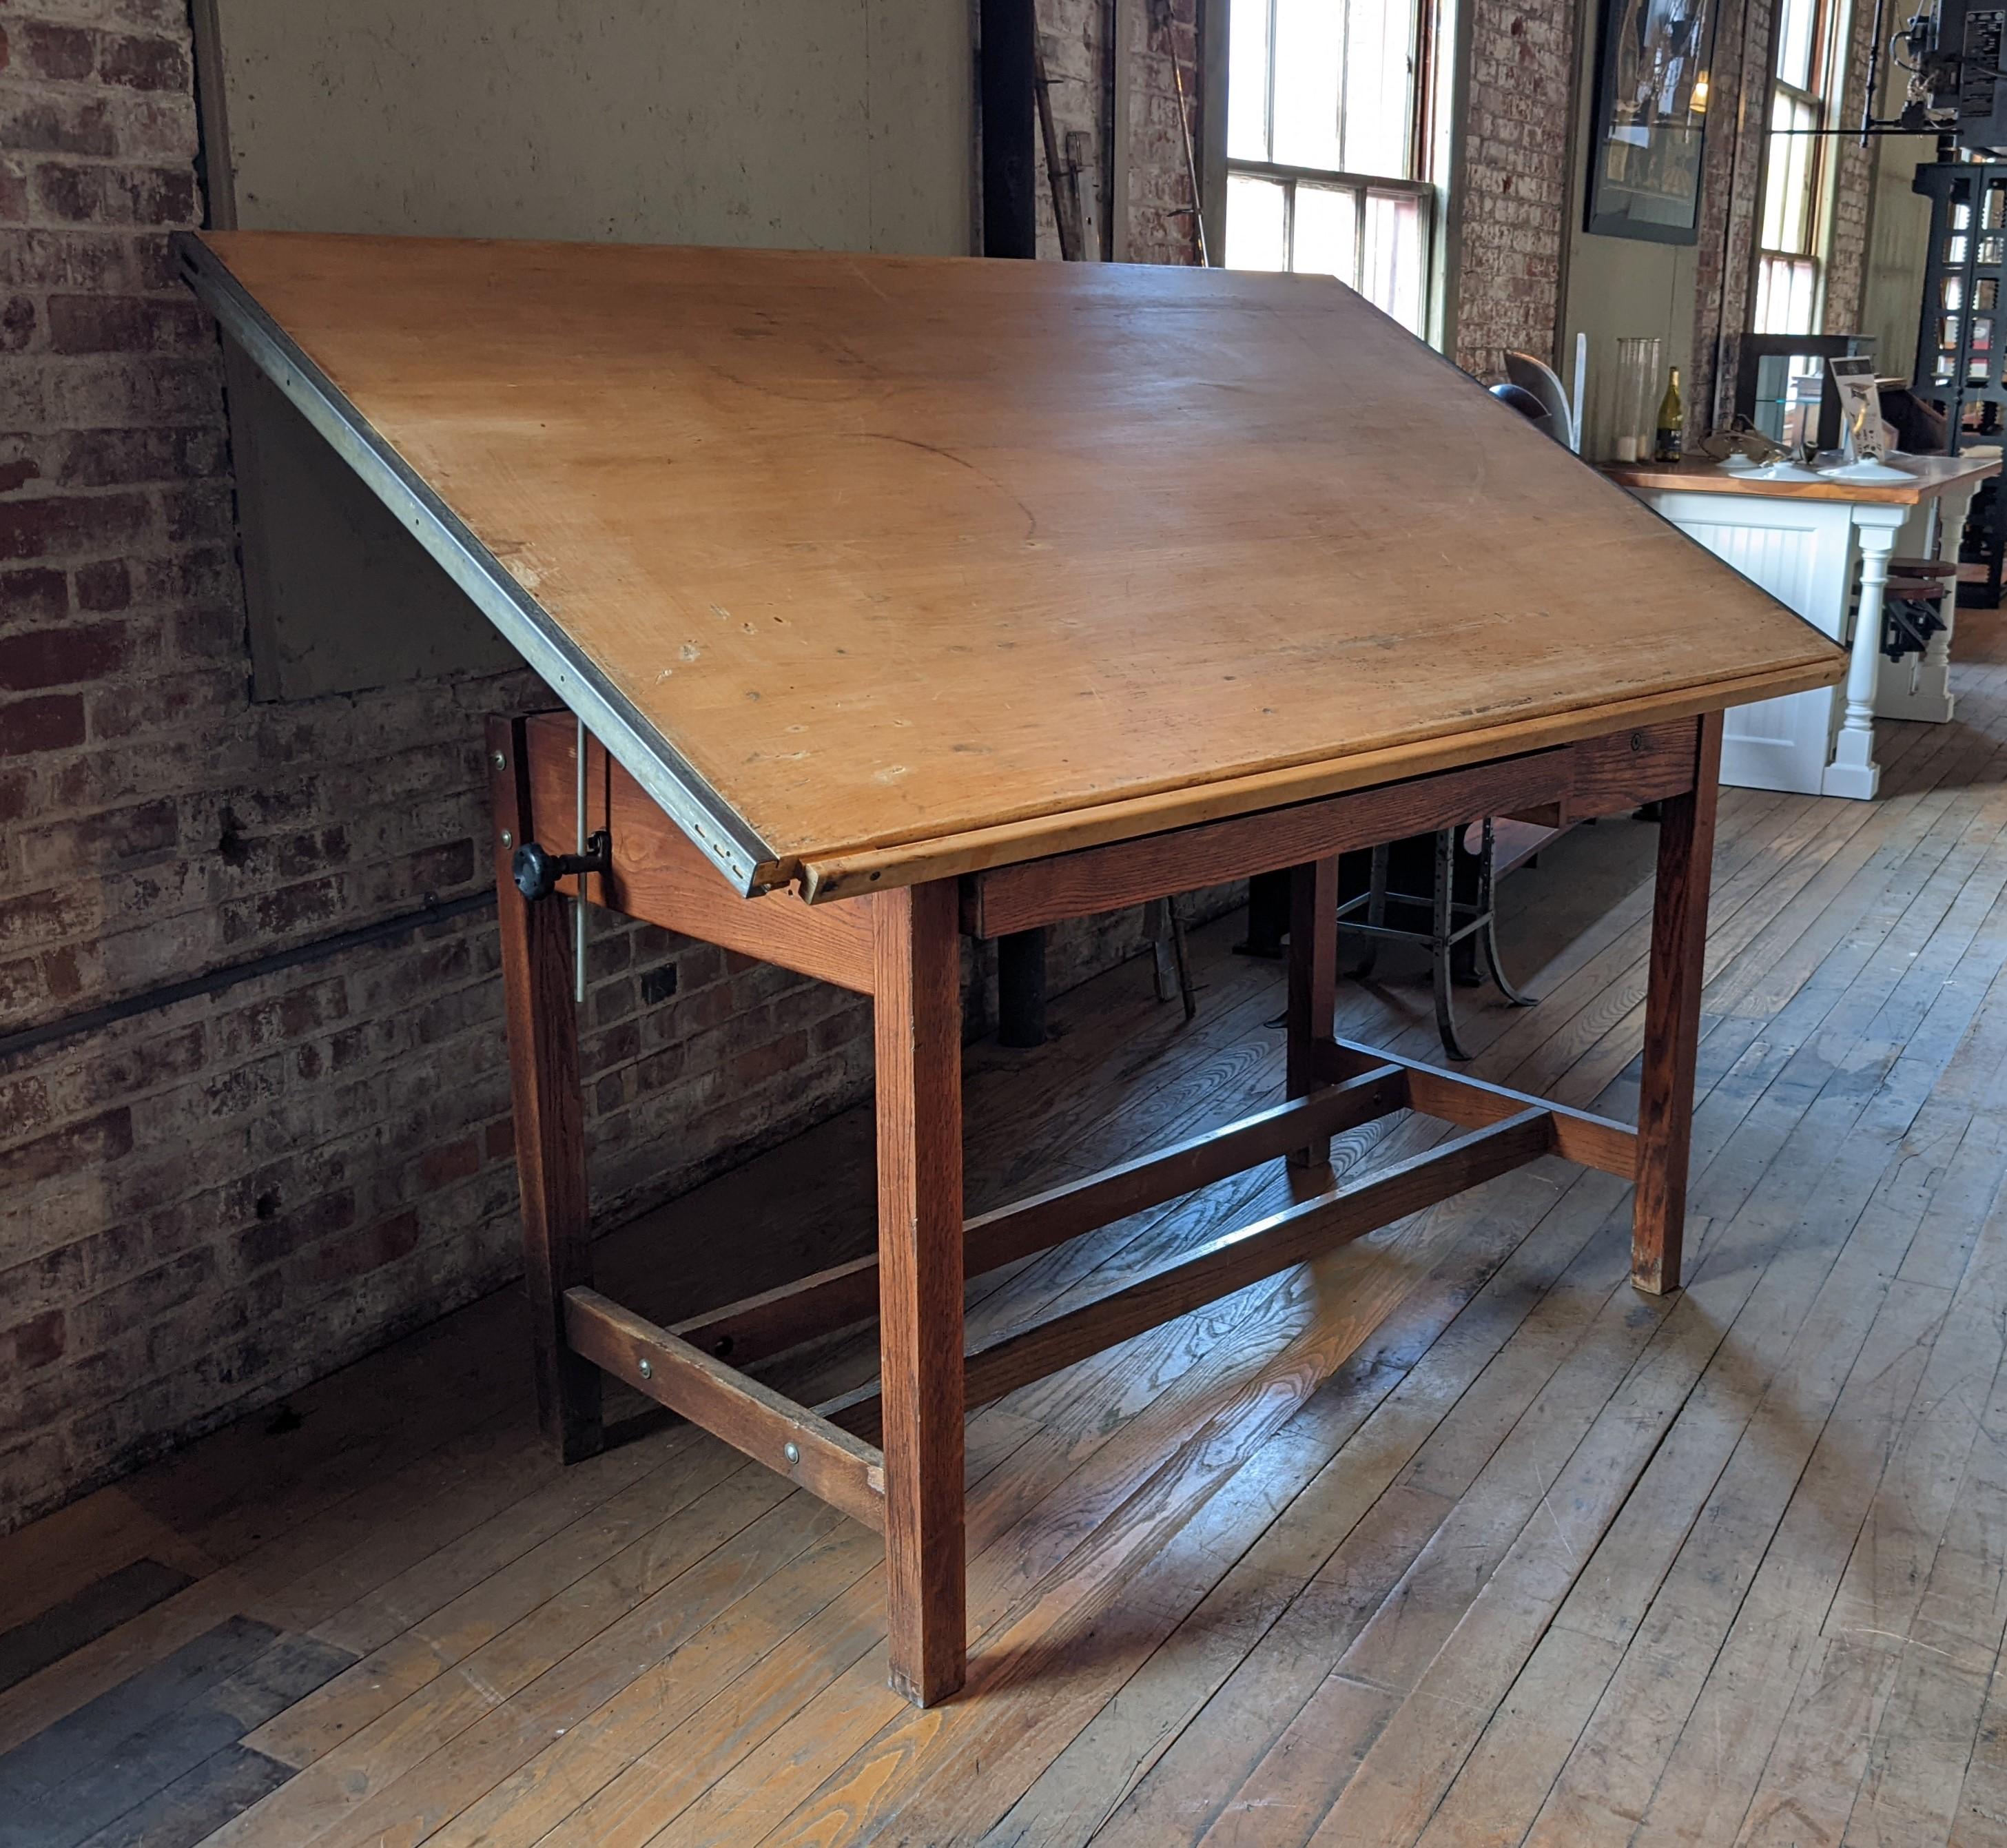 Drafting Table

Overall Dimensions: 72